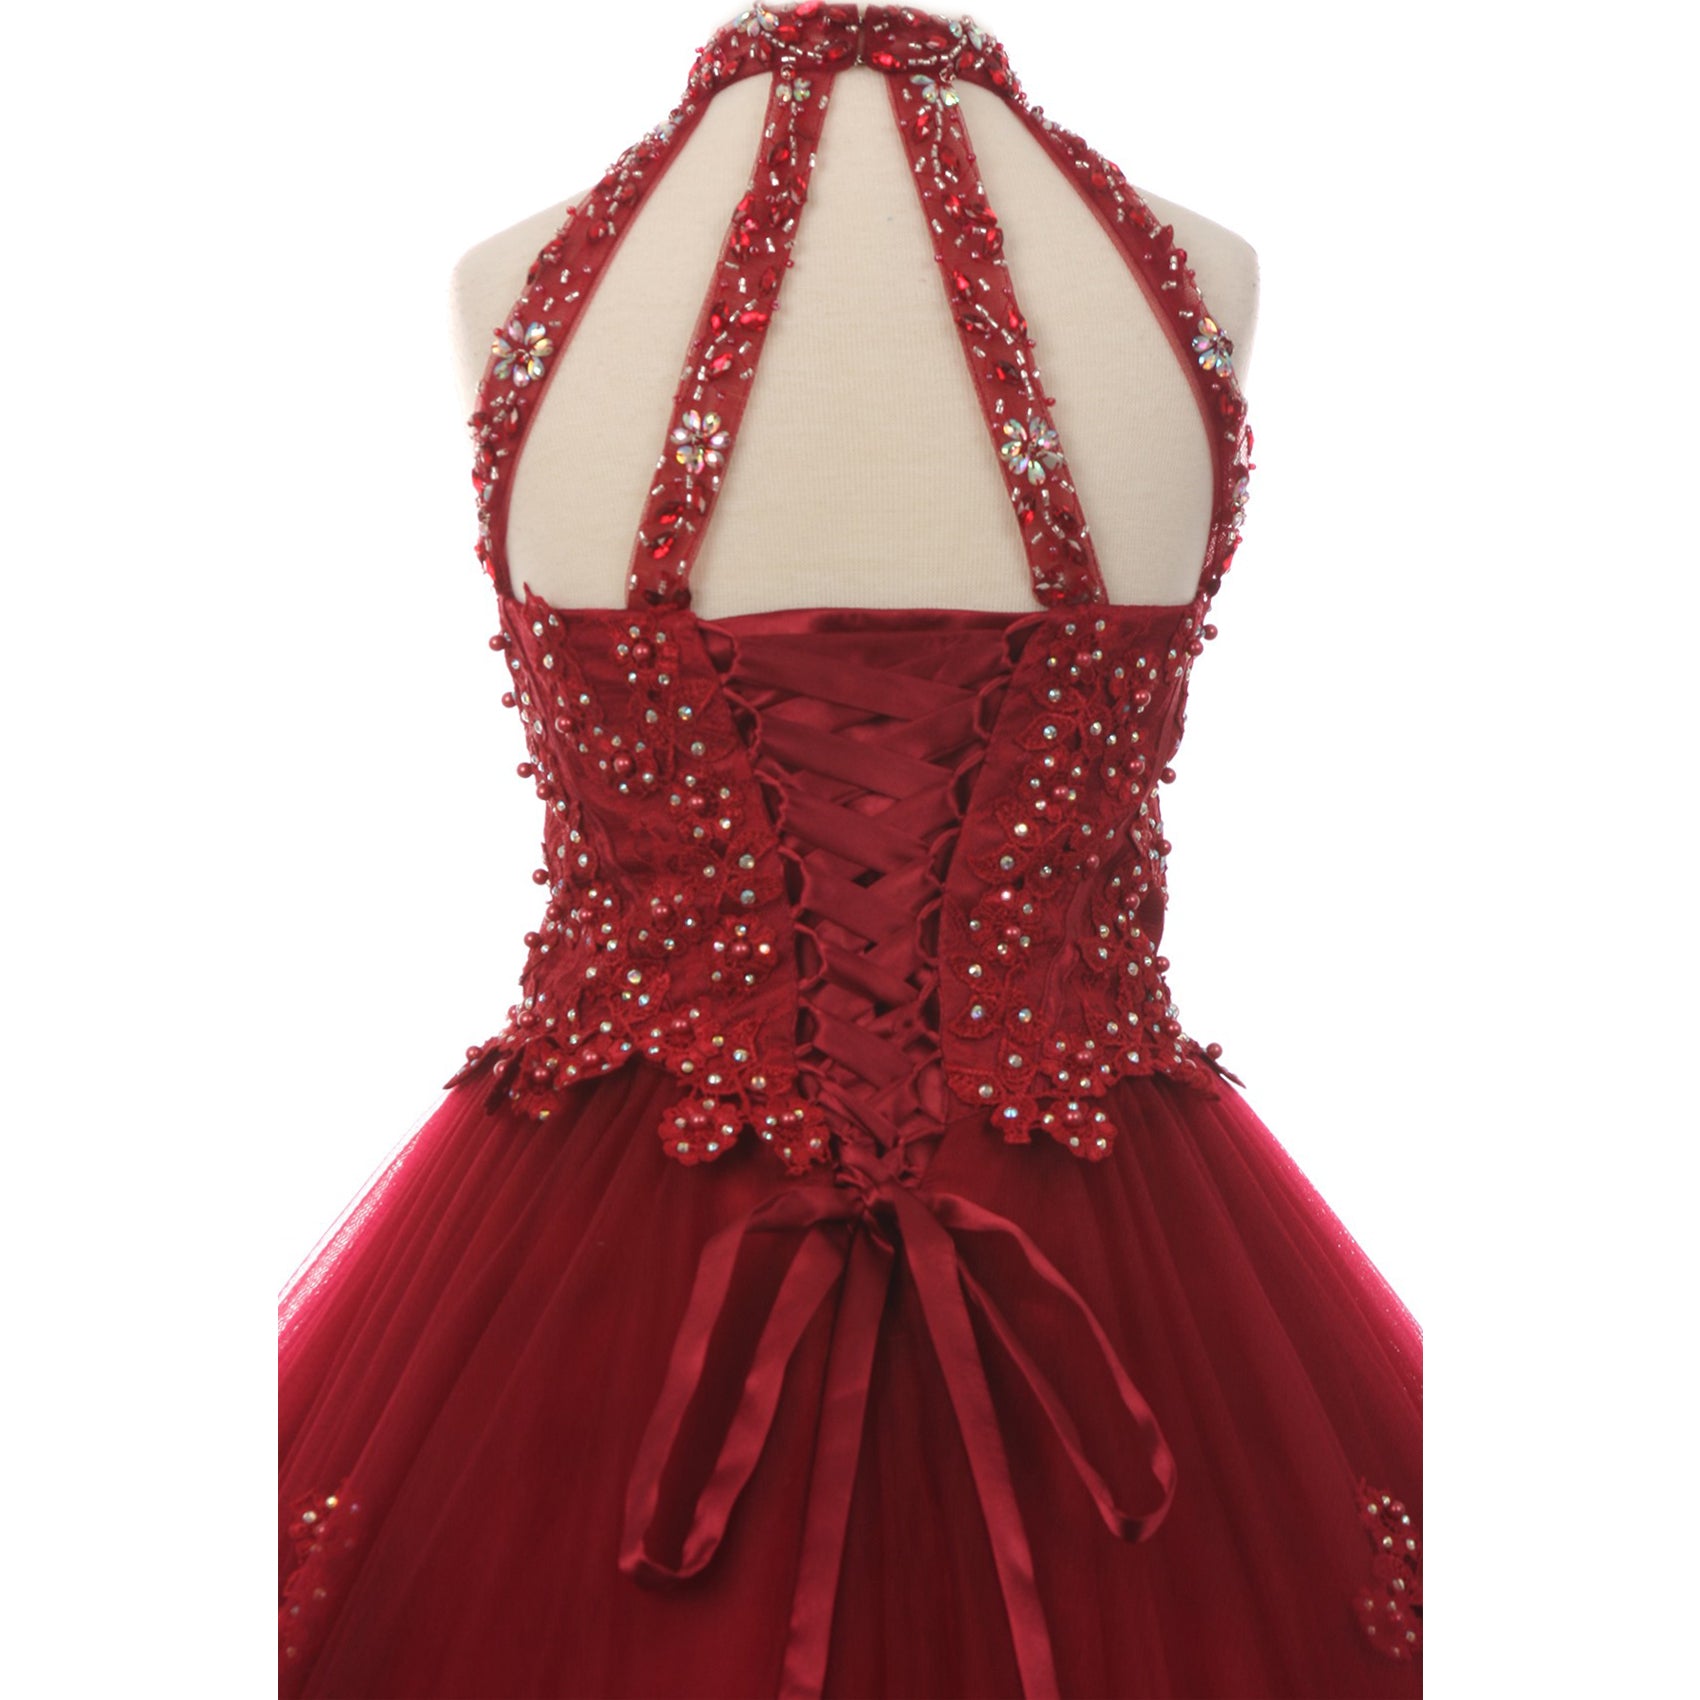 FULL LENGTH HALTER NECK DRESS WITH RHINESTONES AND PEARLS BODICE